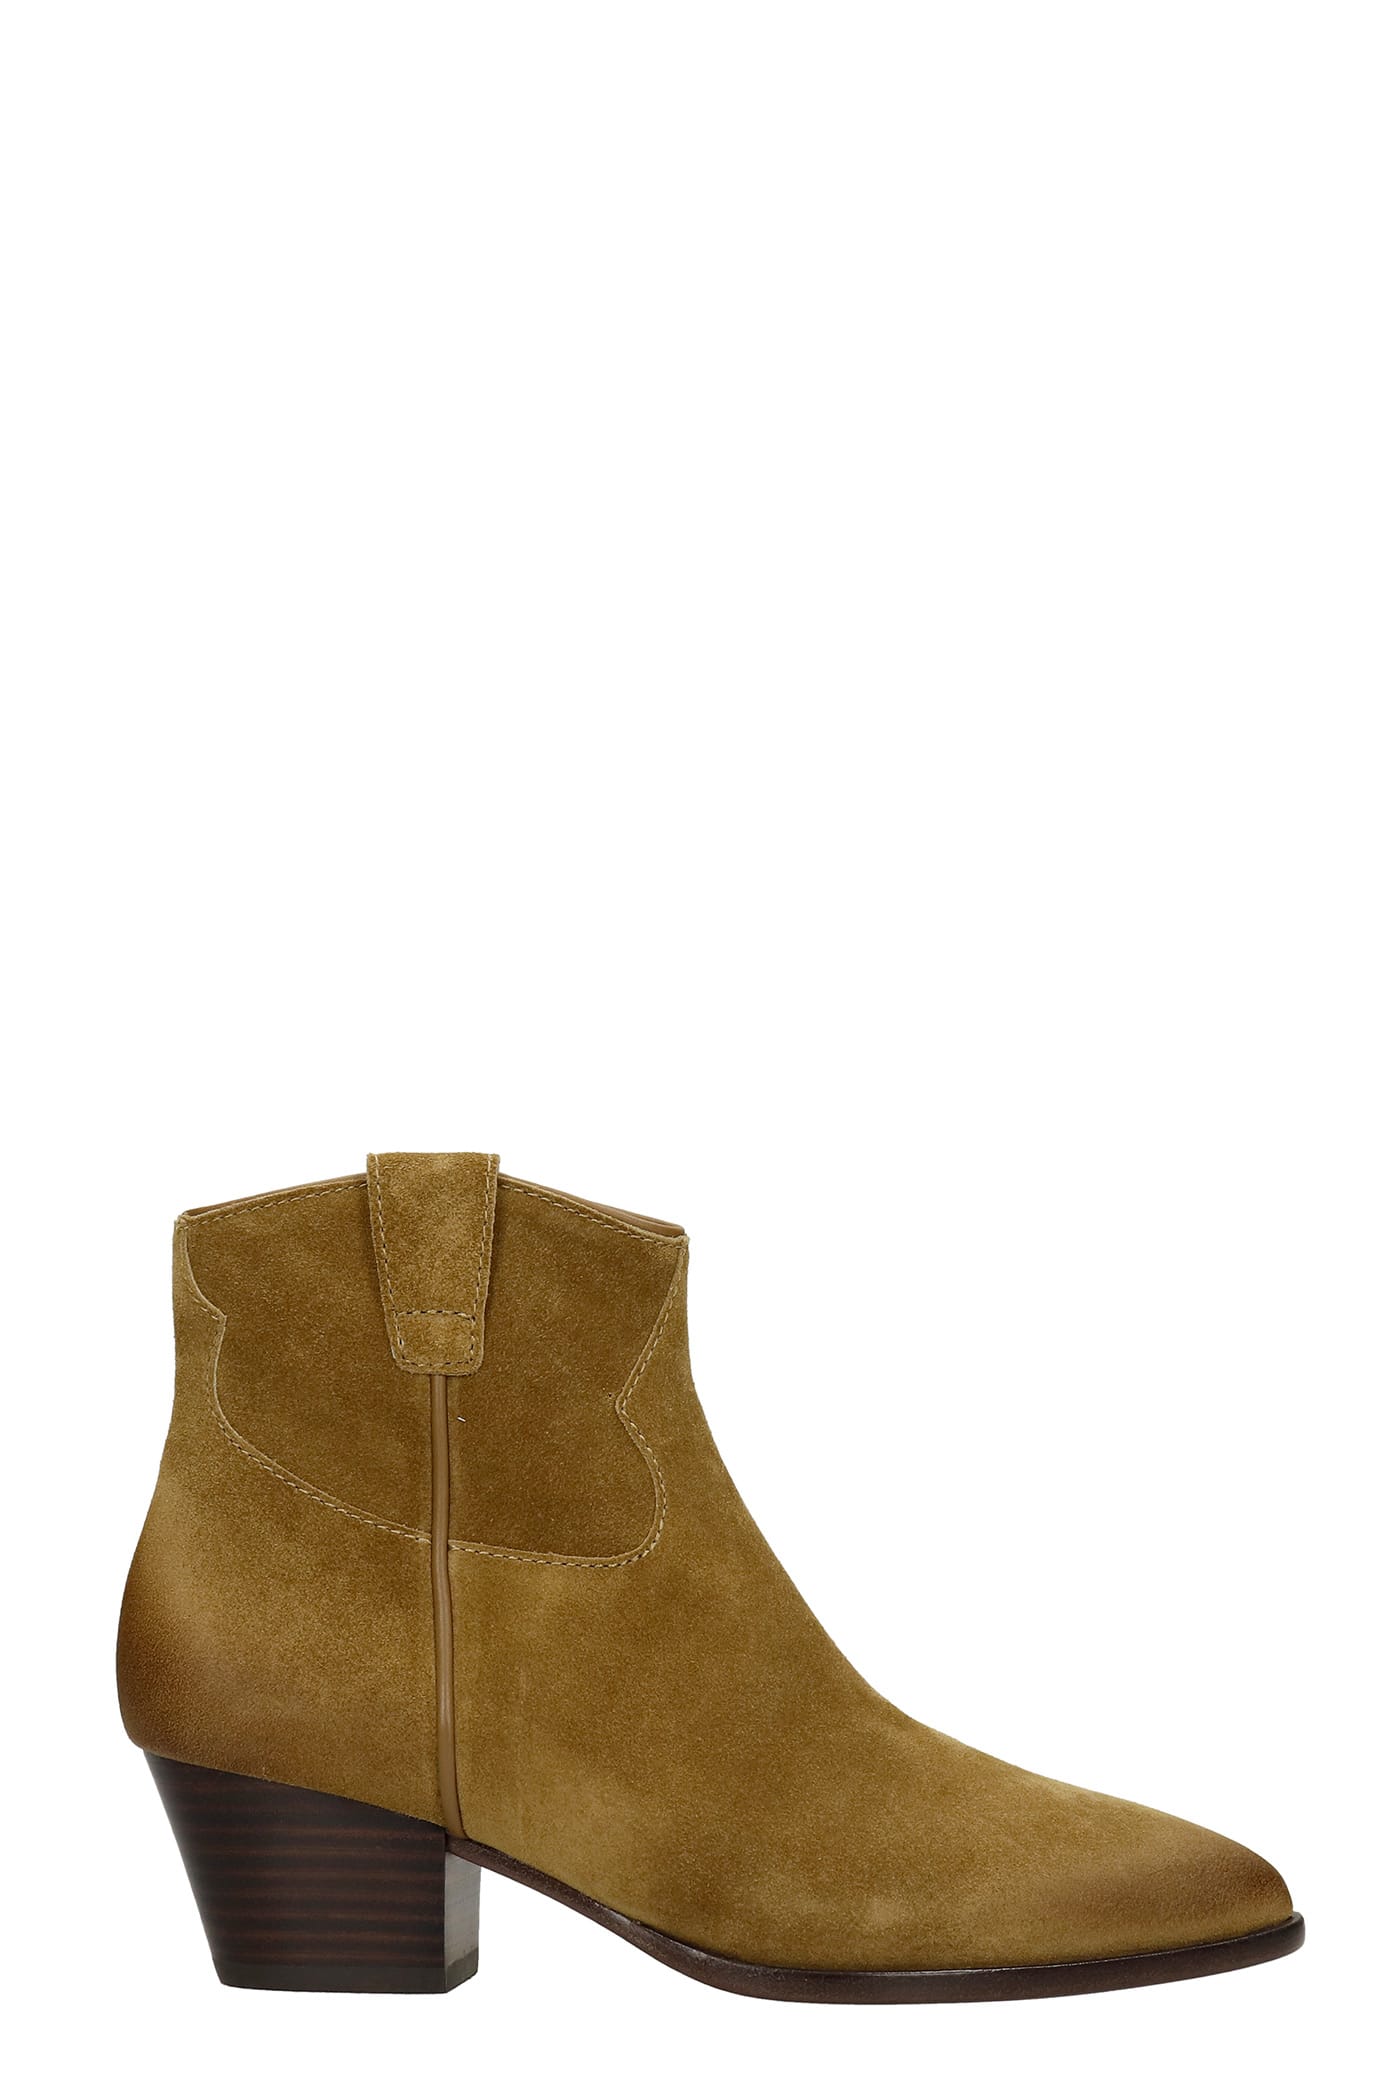 Ash Houston Texan Ankle Boots In Camel Suede